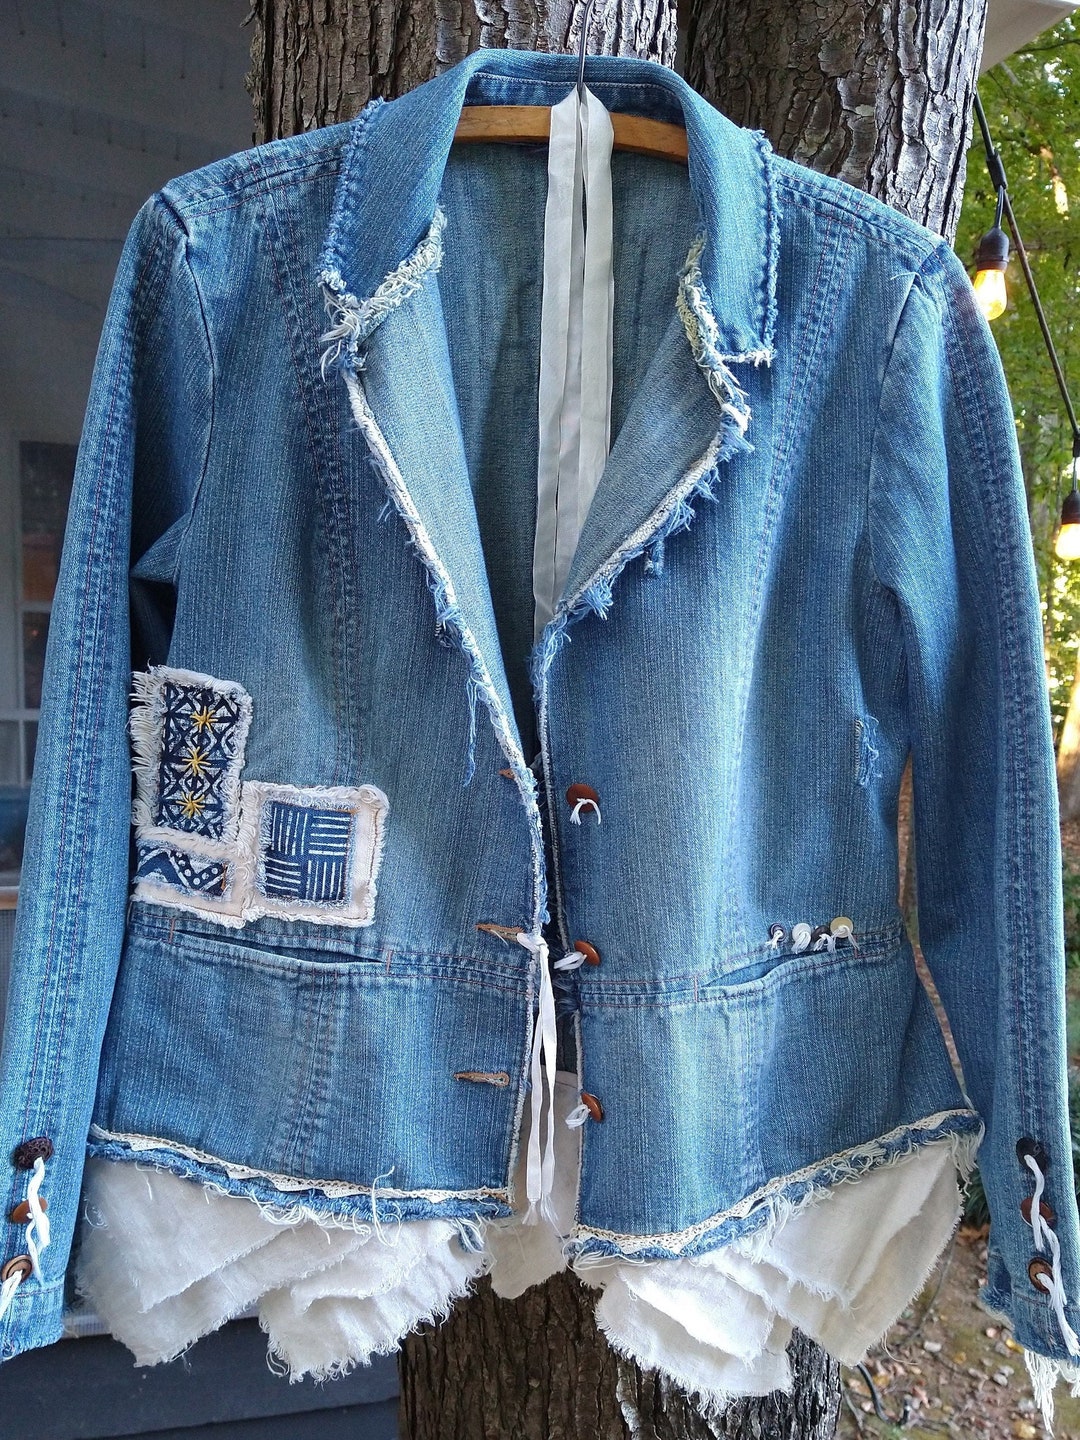 Distressed and Tattered Women's Jeans Jacket Linen and - Etsy